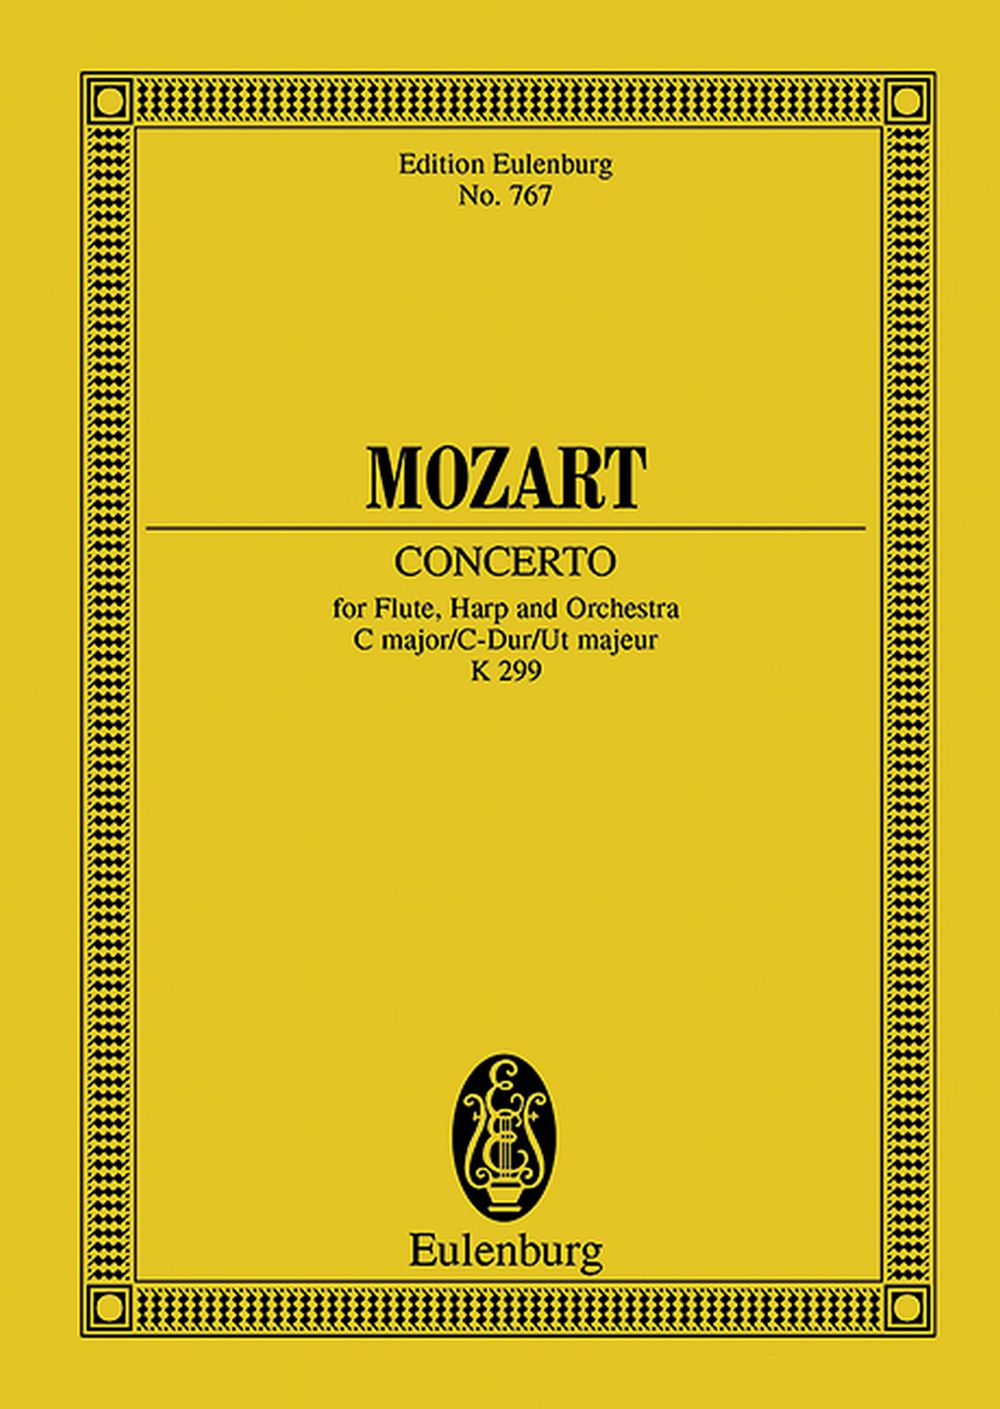 Wolfgang Amadeus Mozart: Concerto In C Major K 299: Orchestra: Miniature Score